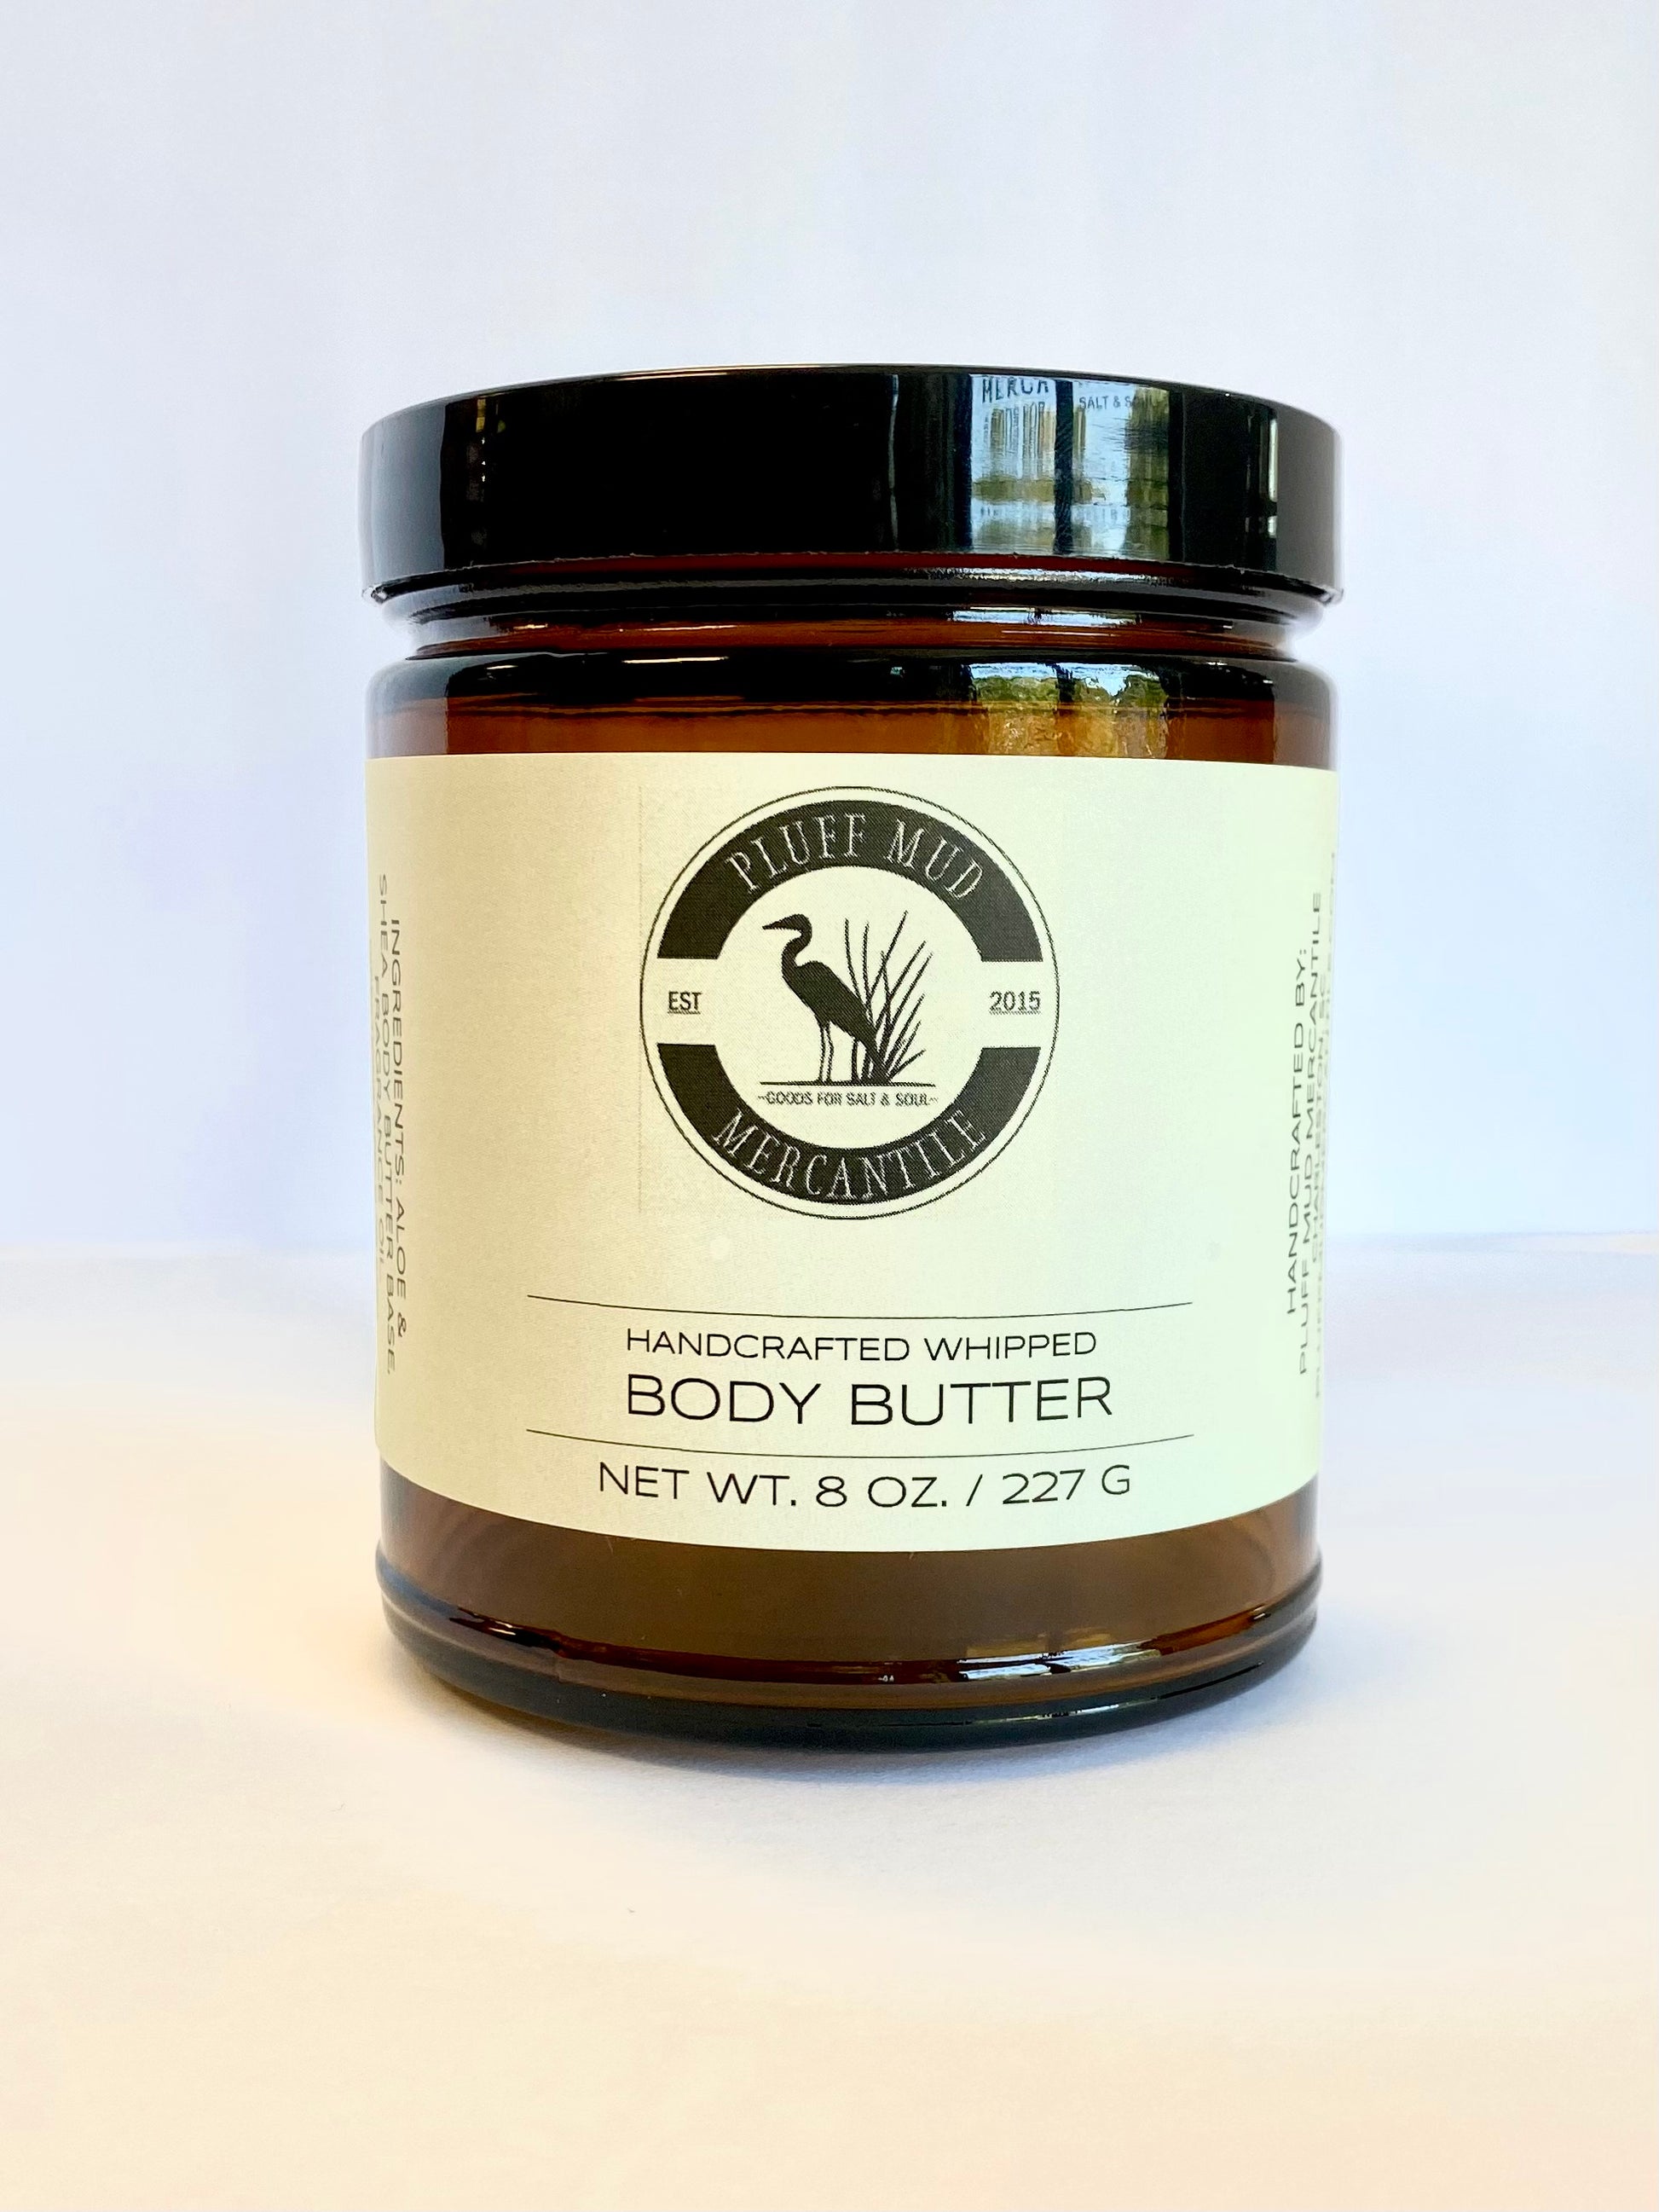 Whipped Body Butter - Kiss My Grits - Pluff Mud Mercantile